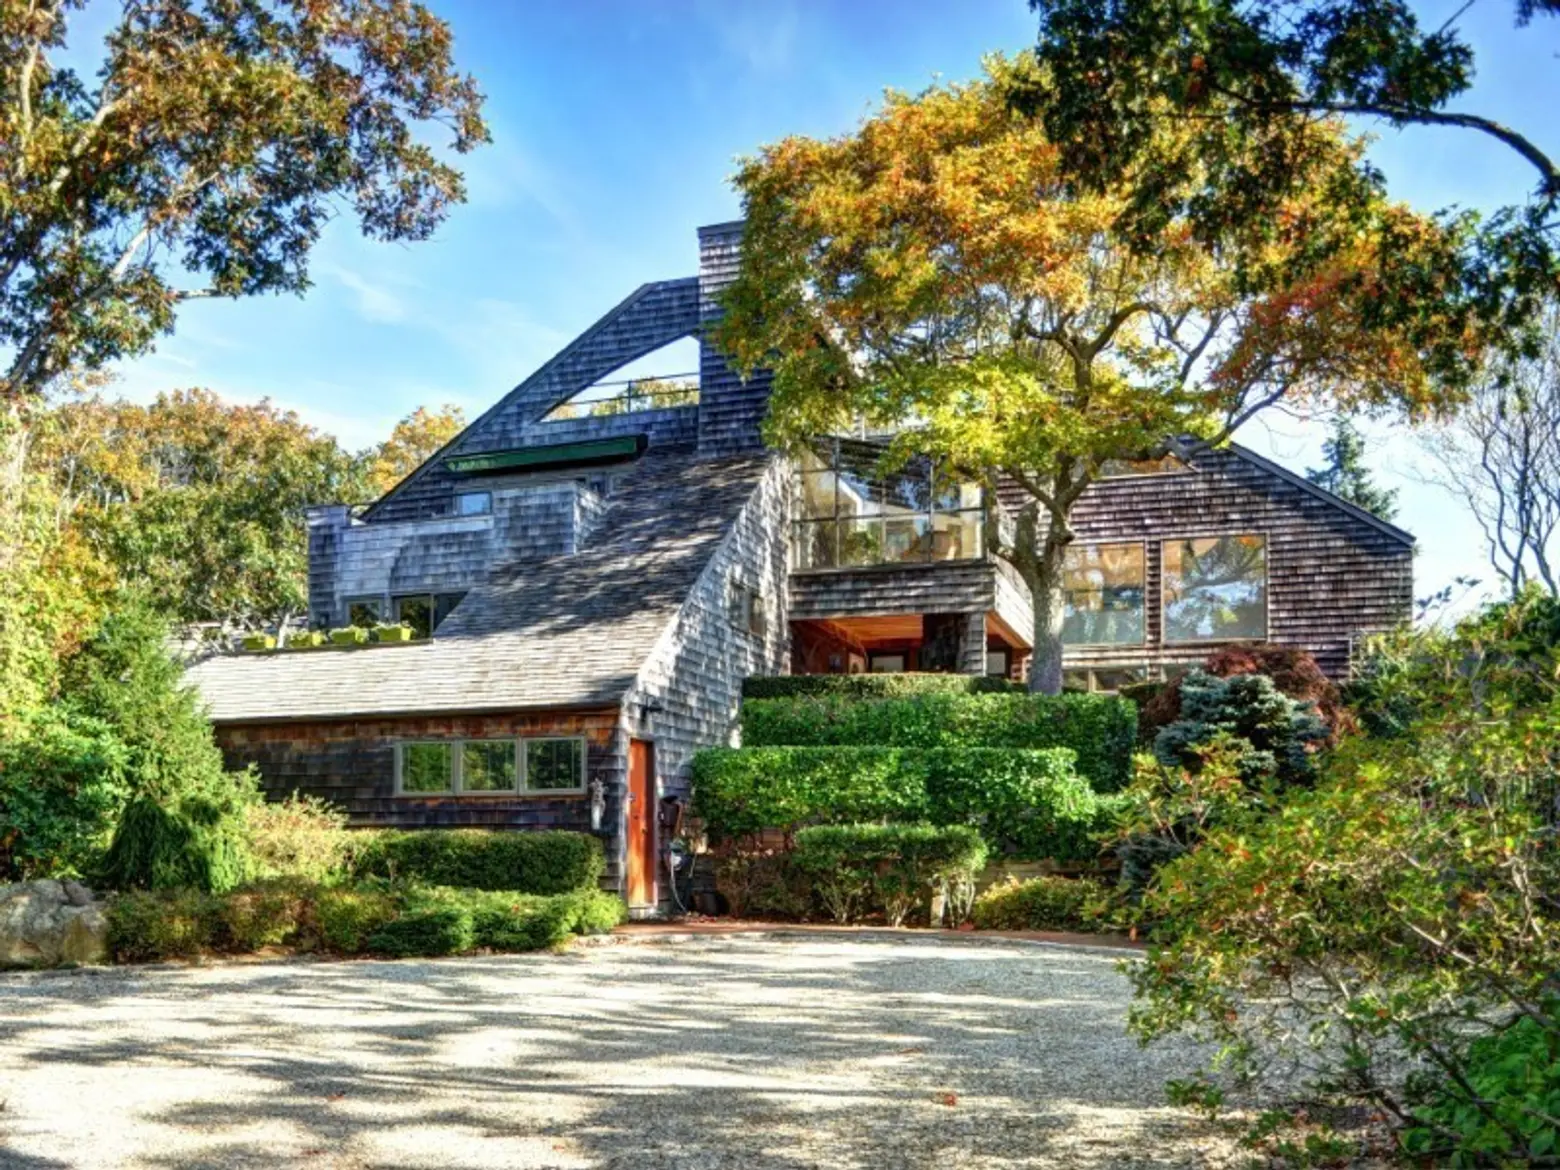 $3M Hamptons Home Was Designed by Robert A.M. Stern in an Unorthodox Shingle Style